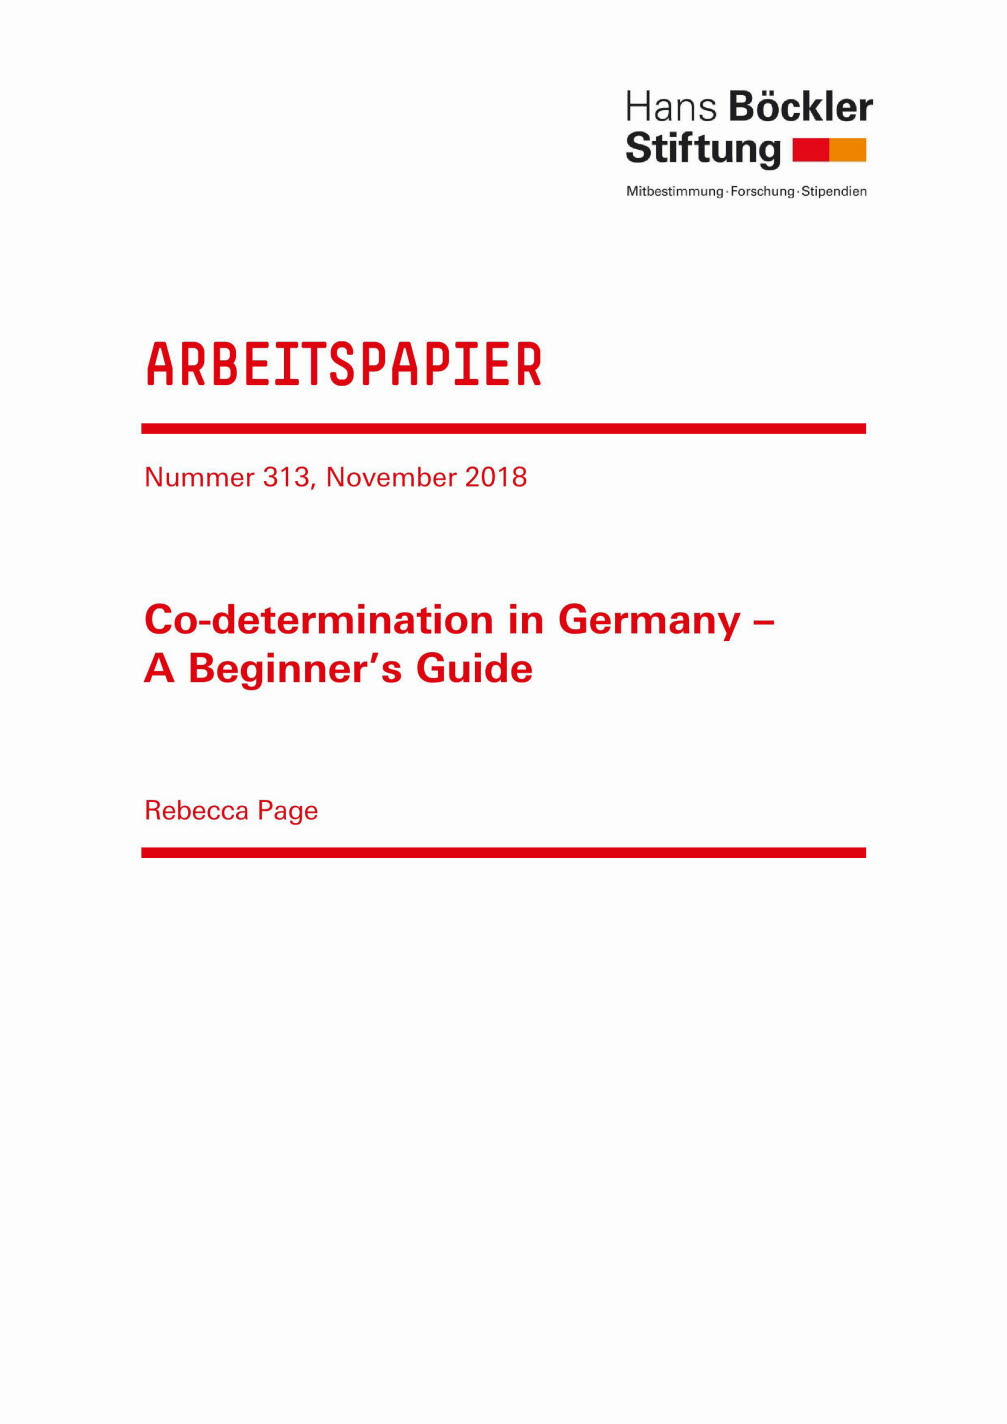 Co-determination in Germany - A beginner´s guide